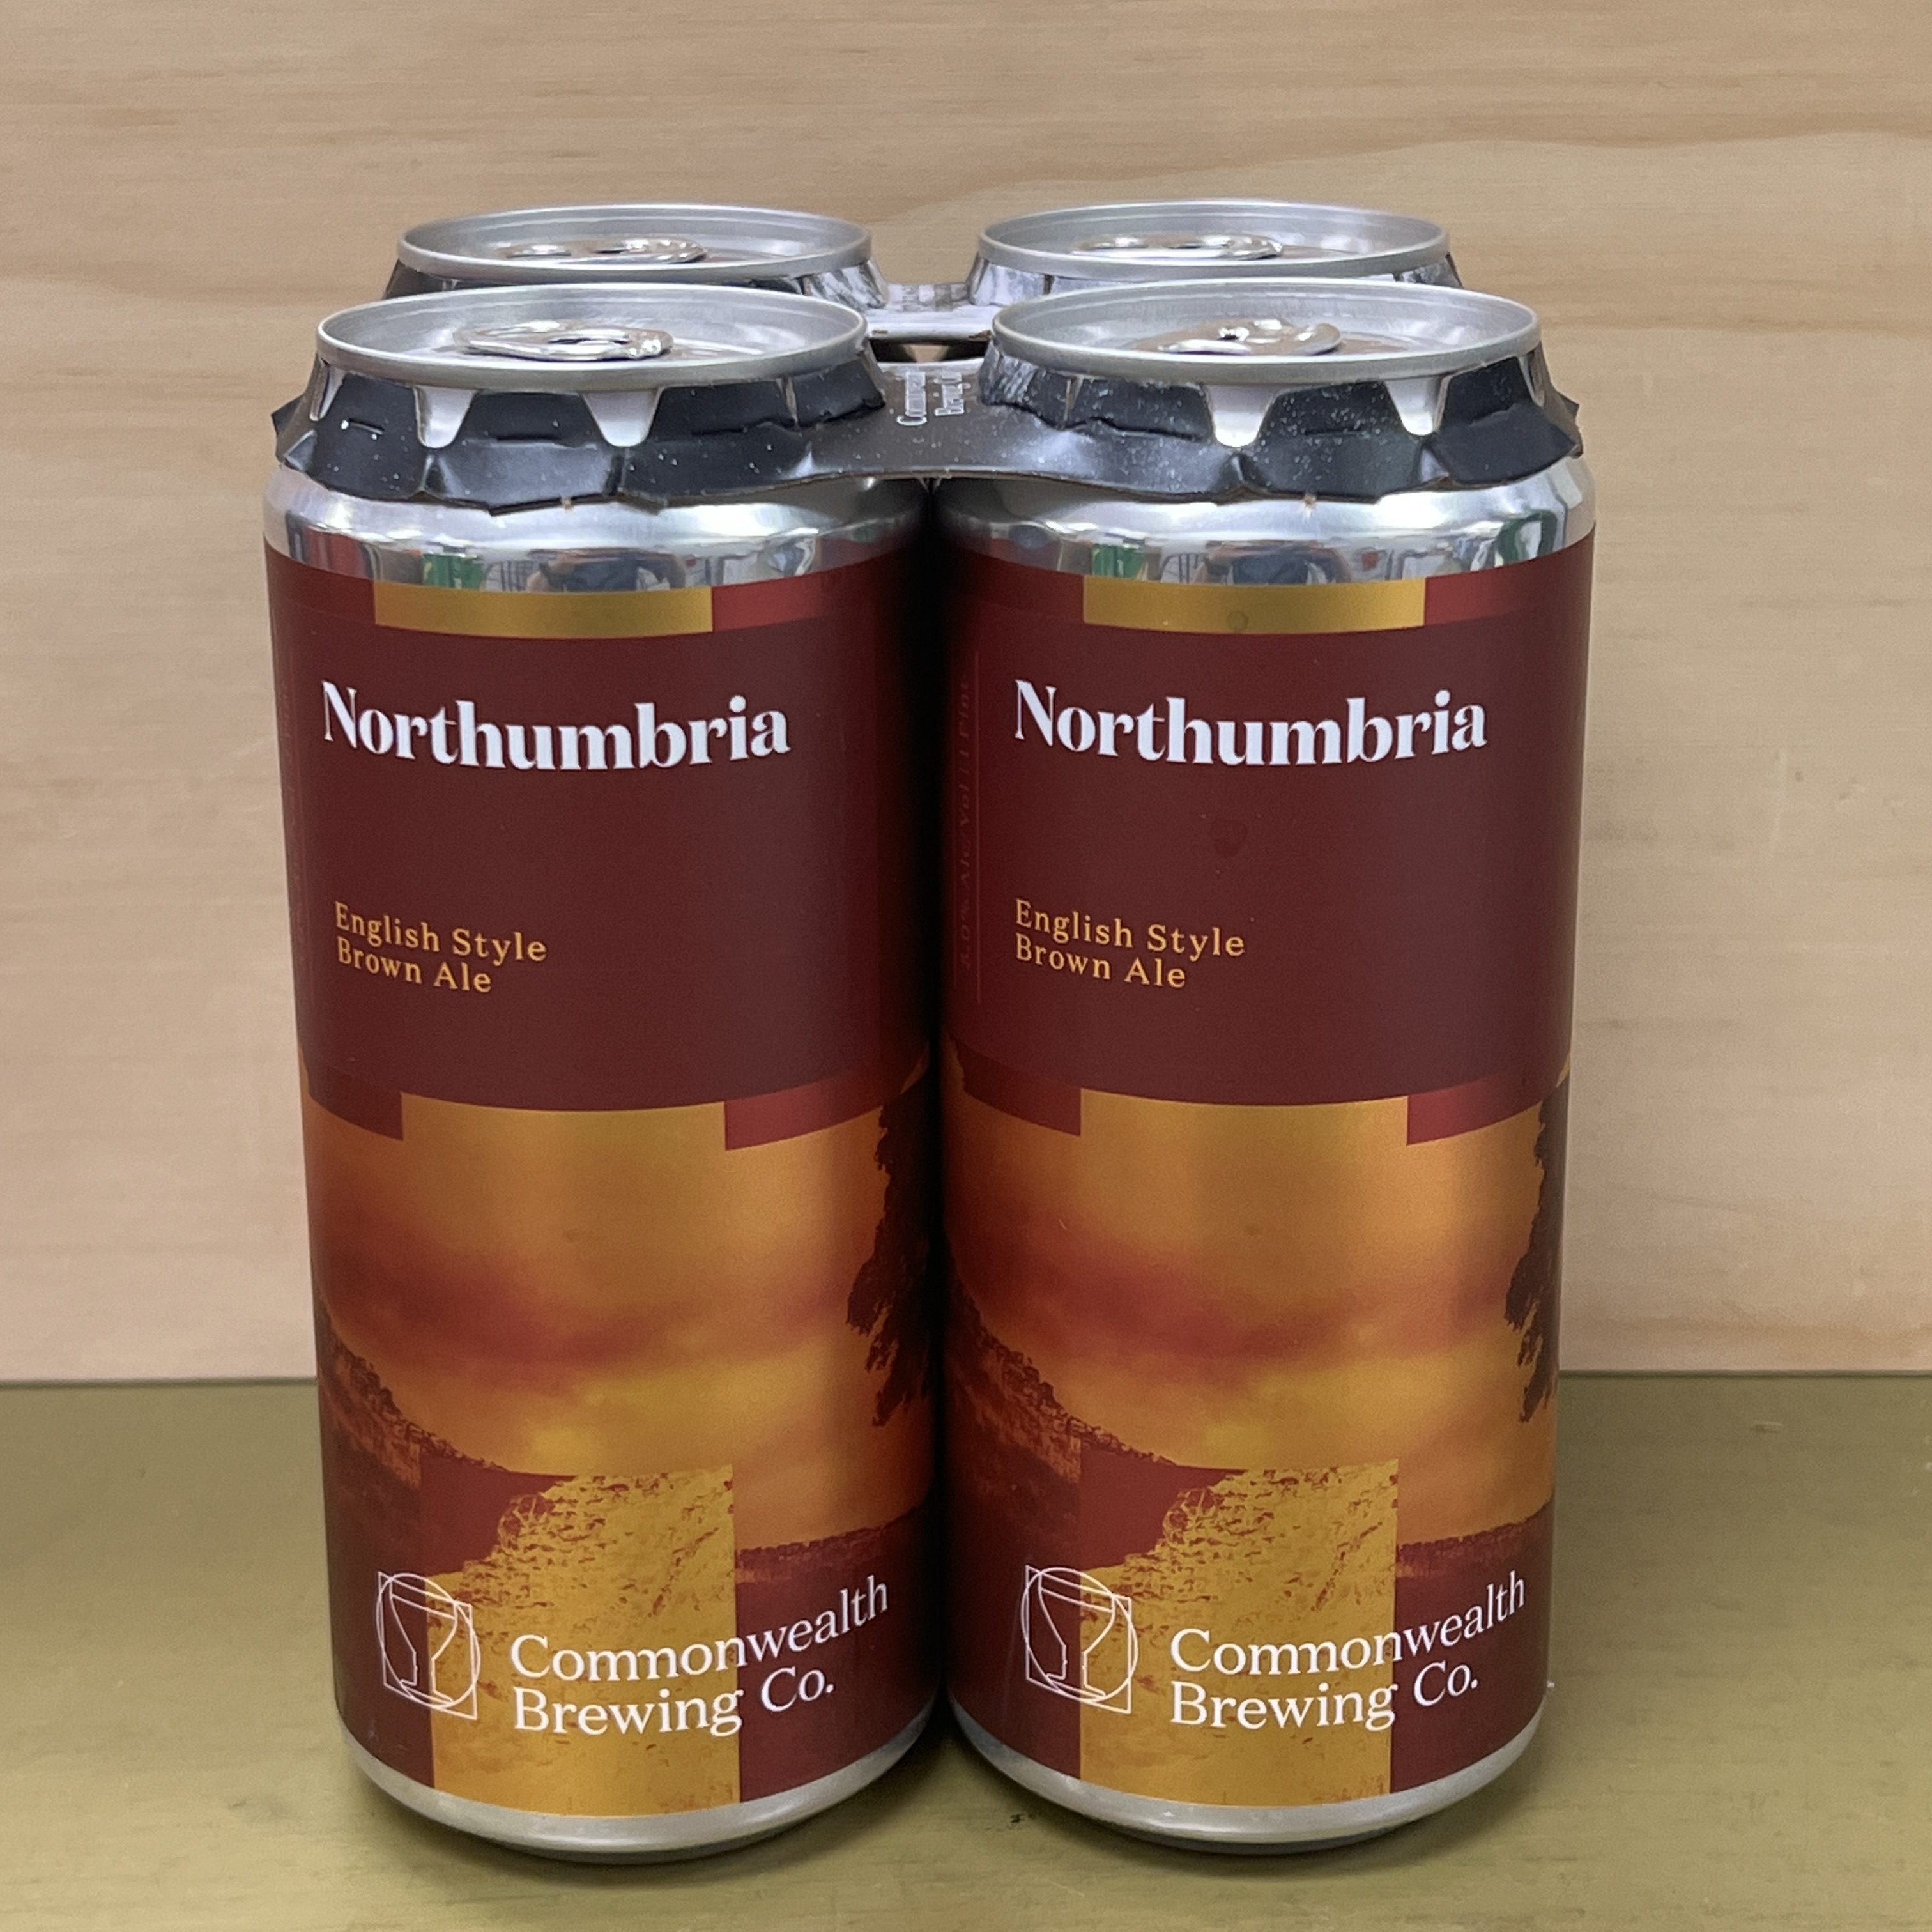 Commonwealth Brewing Northumbria English Style Brown Ale 4 x 16oz cans